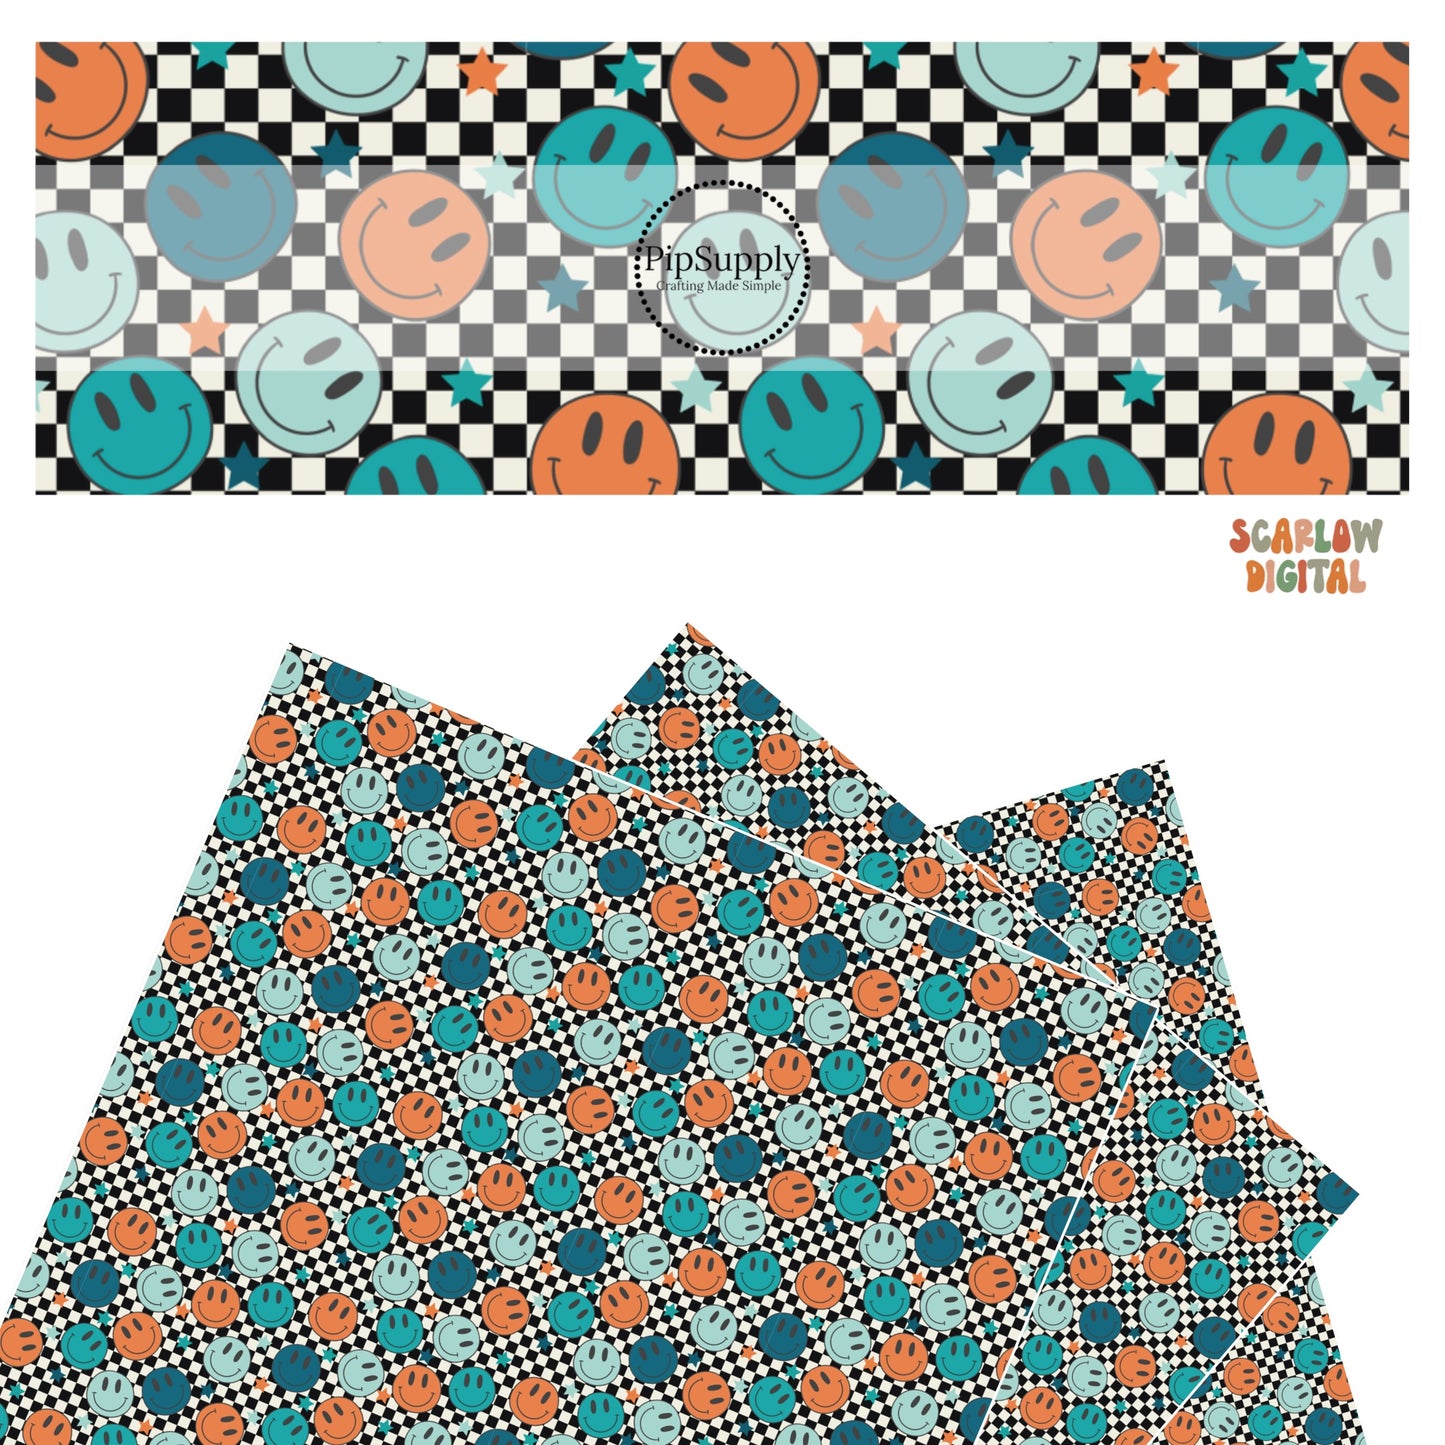 Orange, teal, turquoise, and light blue smiley faces with matching colored stars on black and white checker faux leather sheets